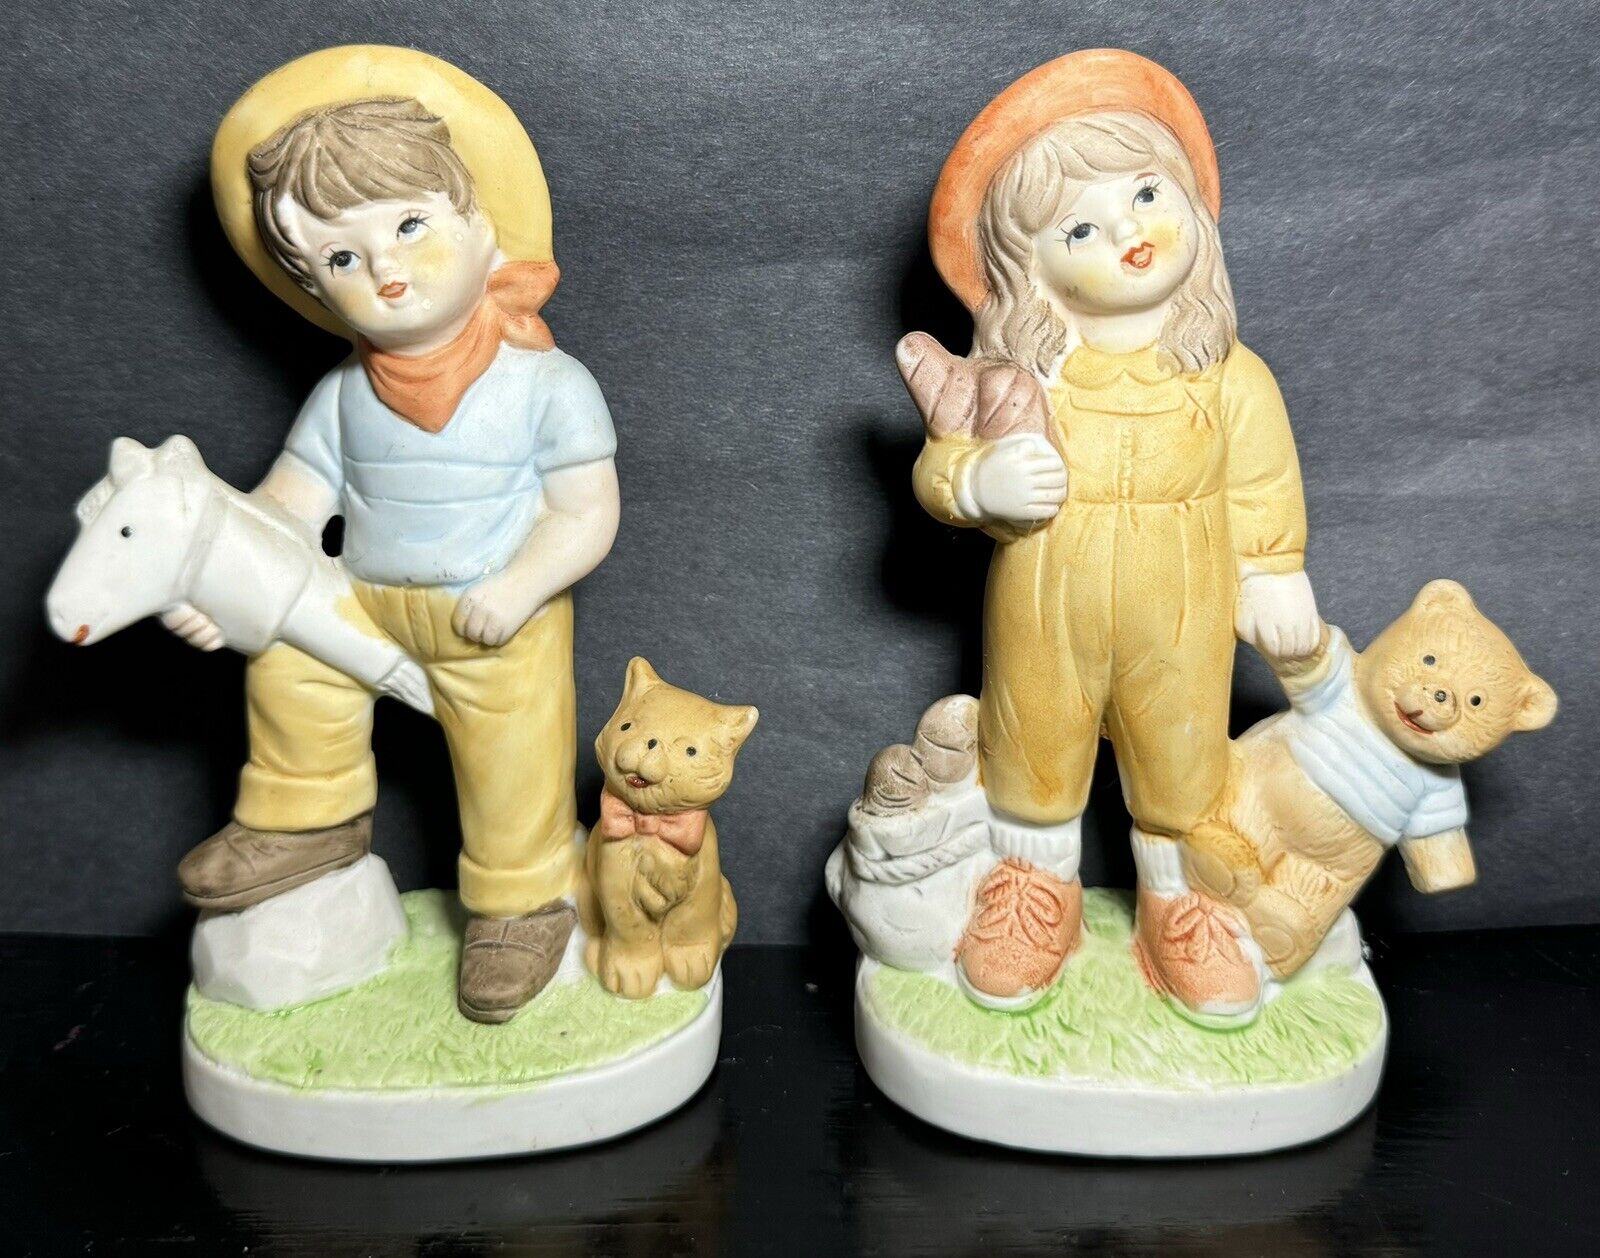 Vintage Porcelain Boy With Cat & Girl With Teddy Bear Figurines 5.5”